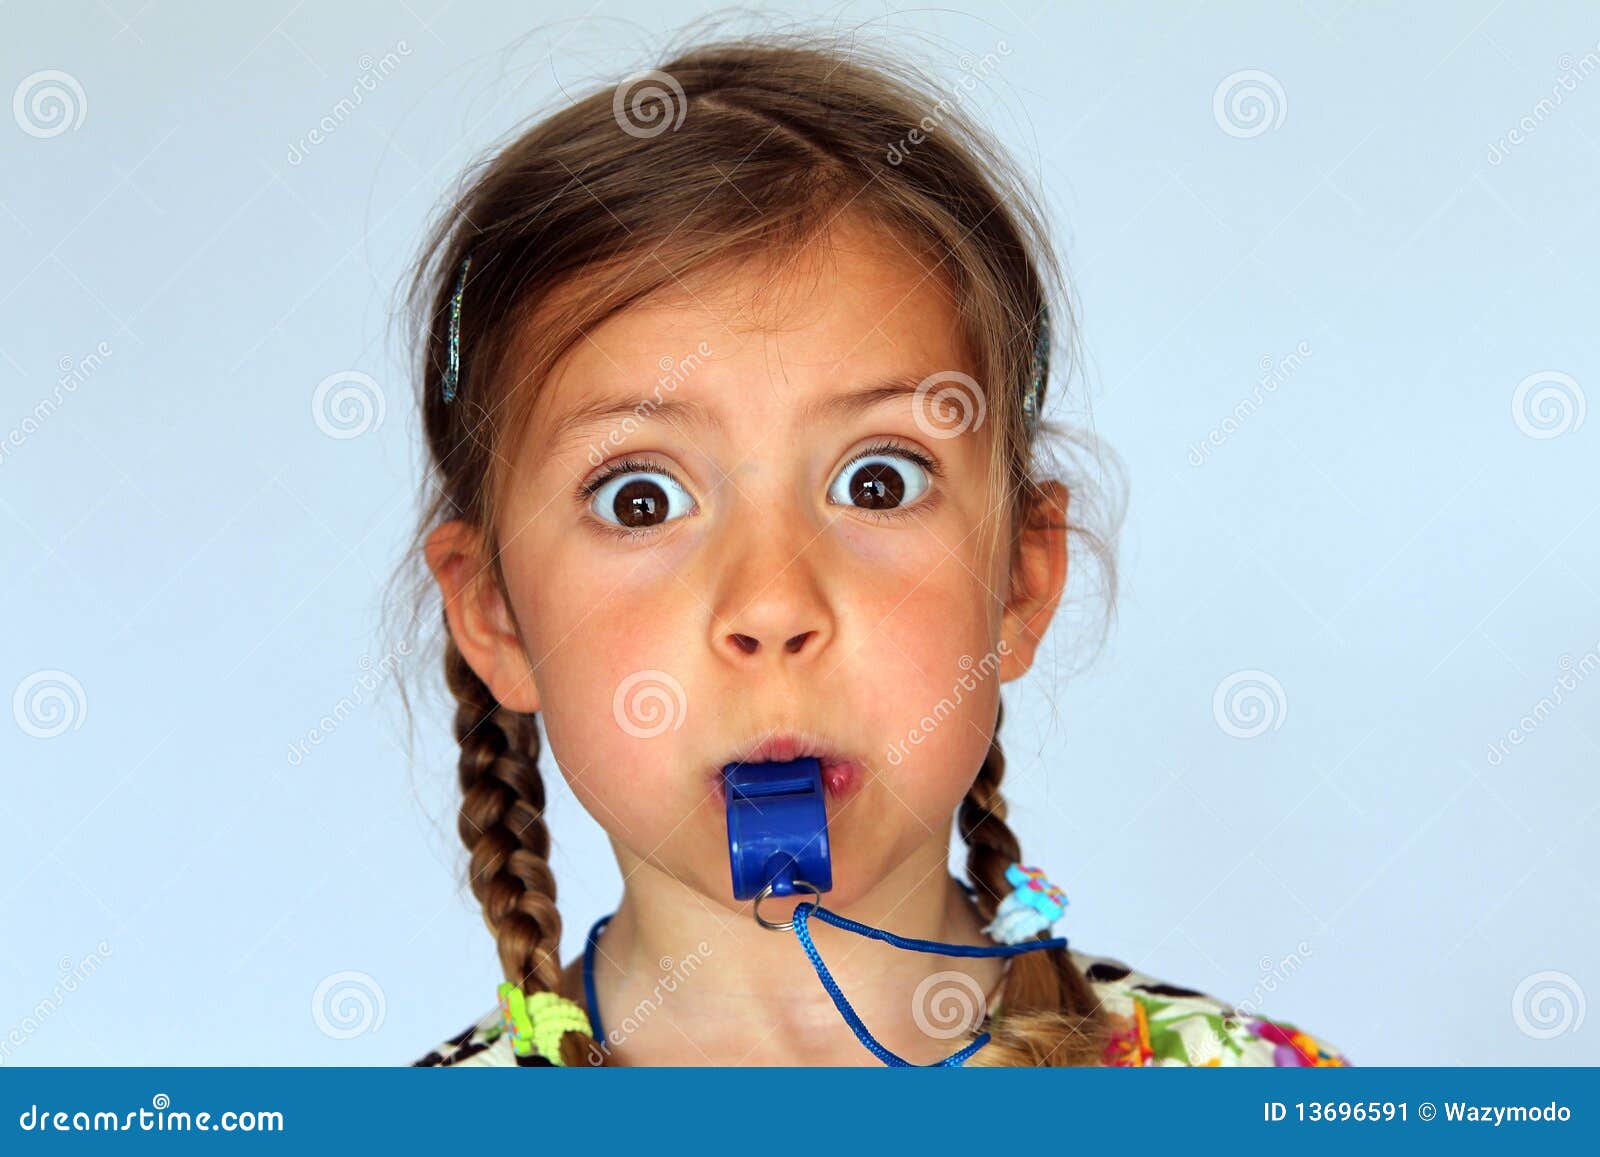 girl blowing whistle